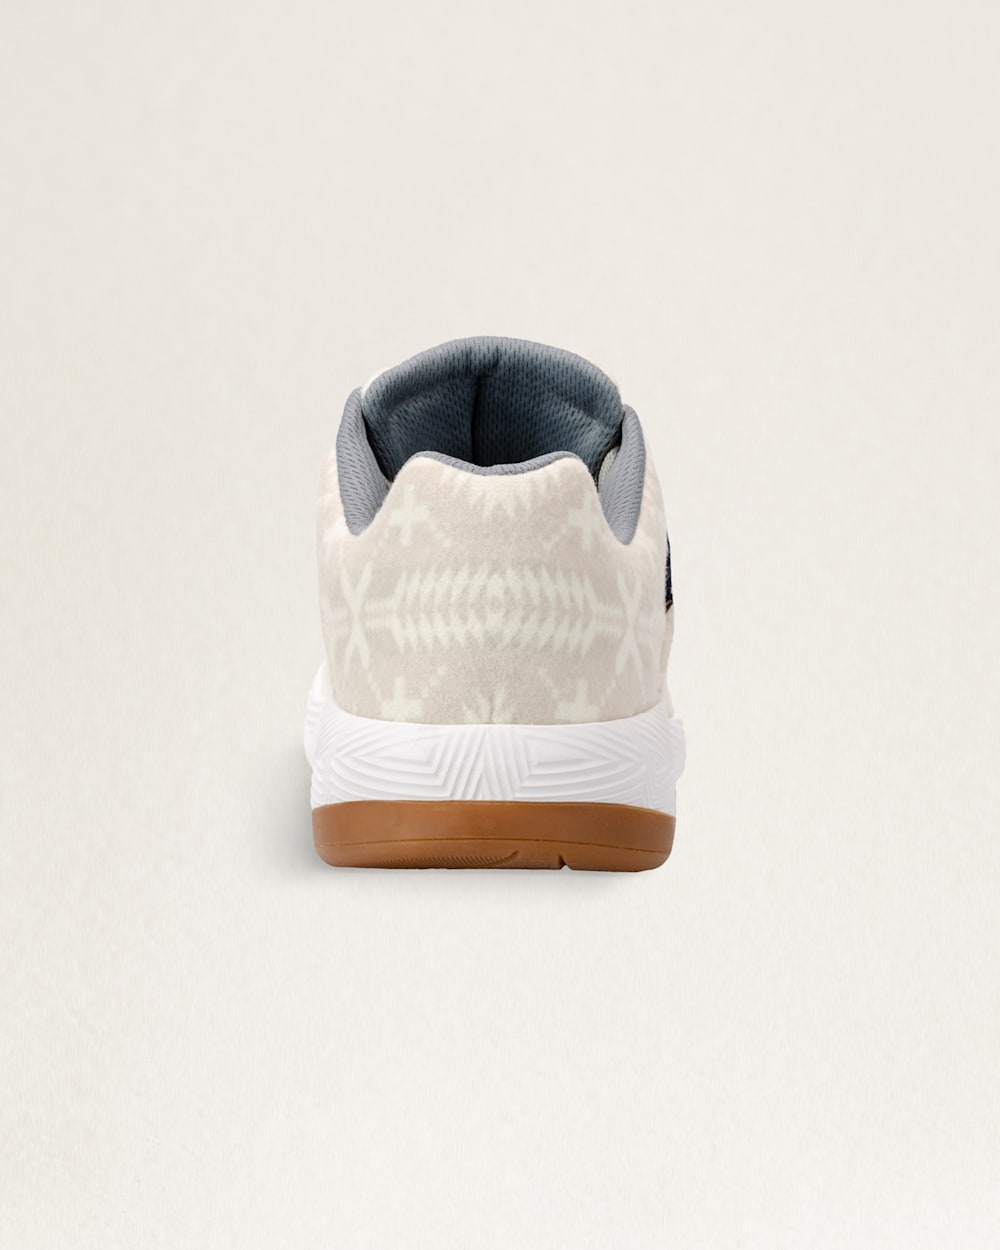 ALTERNATE VIEW OF WOMEN'S WOOL SNEAKERS IN OFF WHITE SPIDER ROCK image number 2